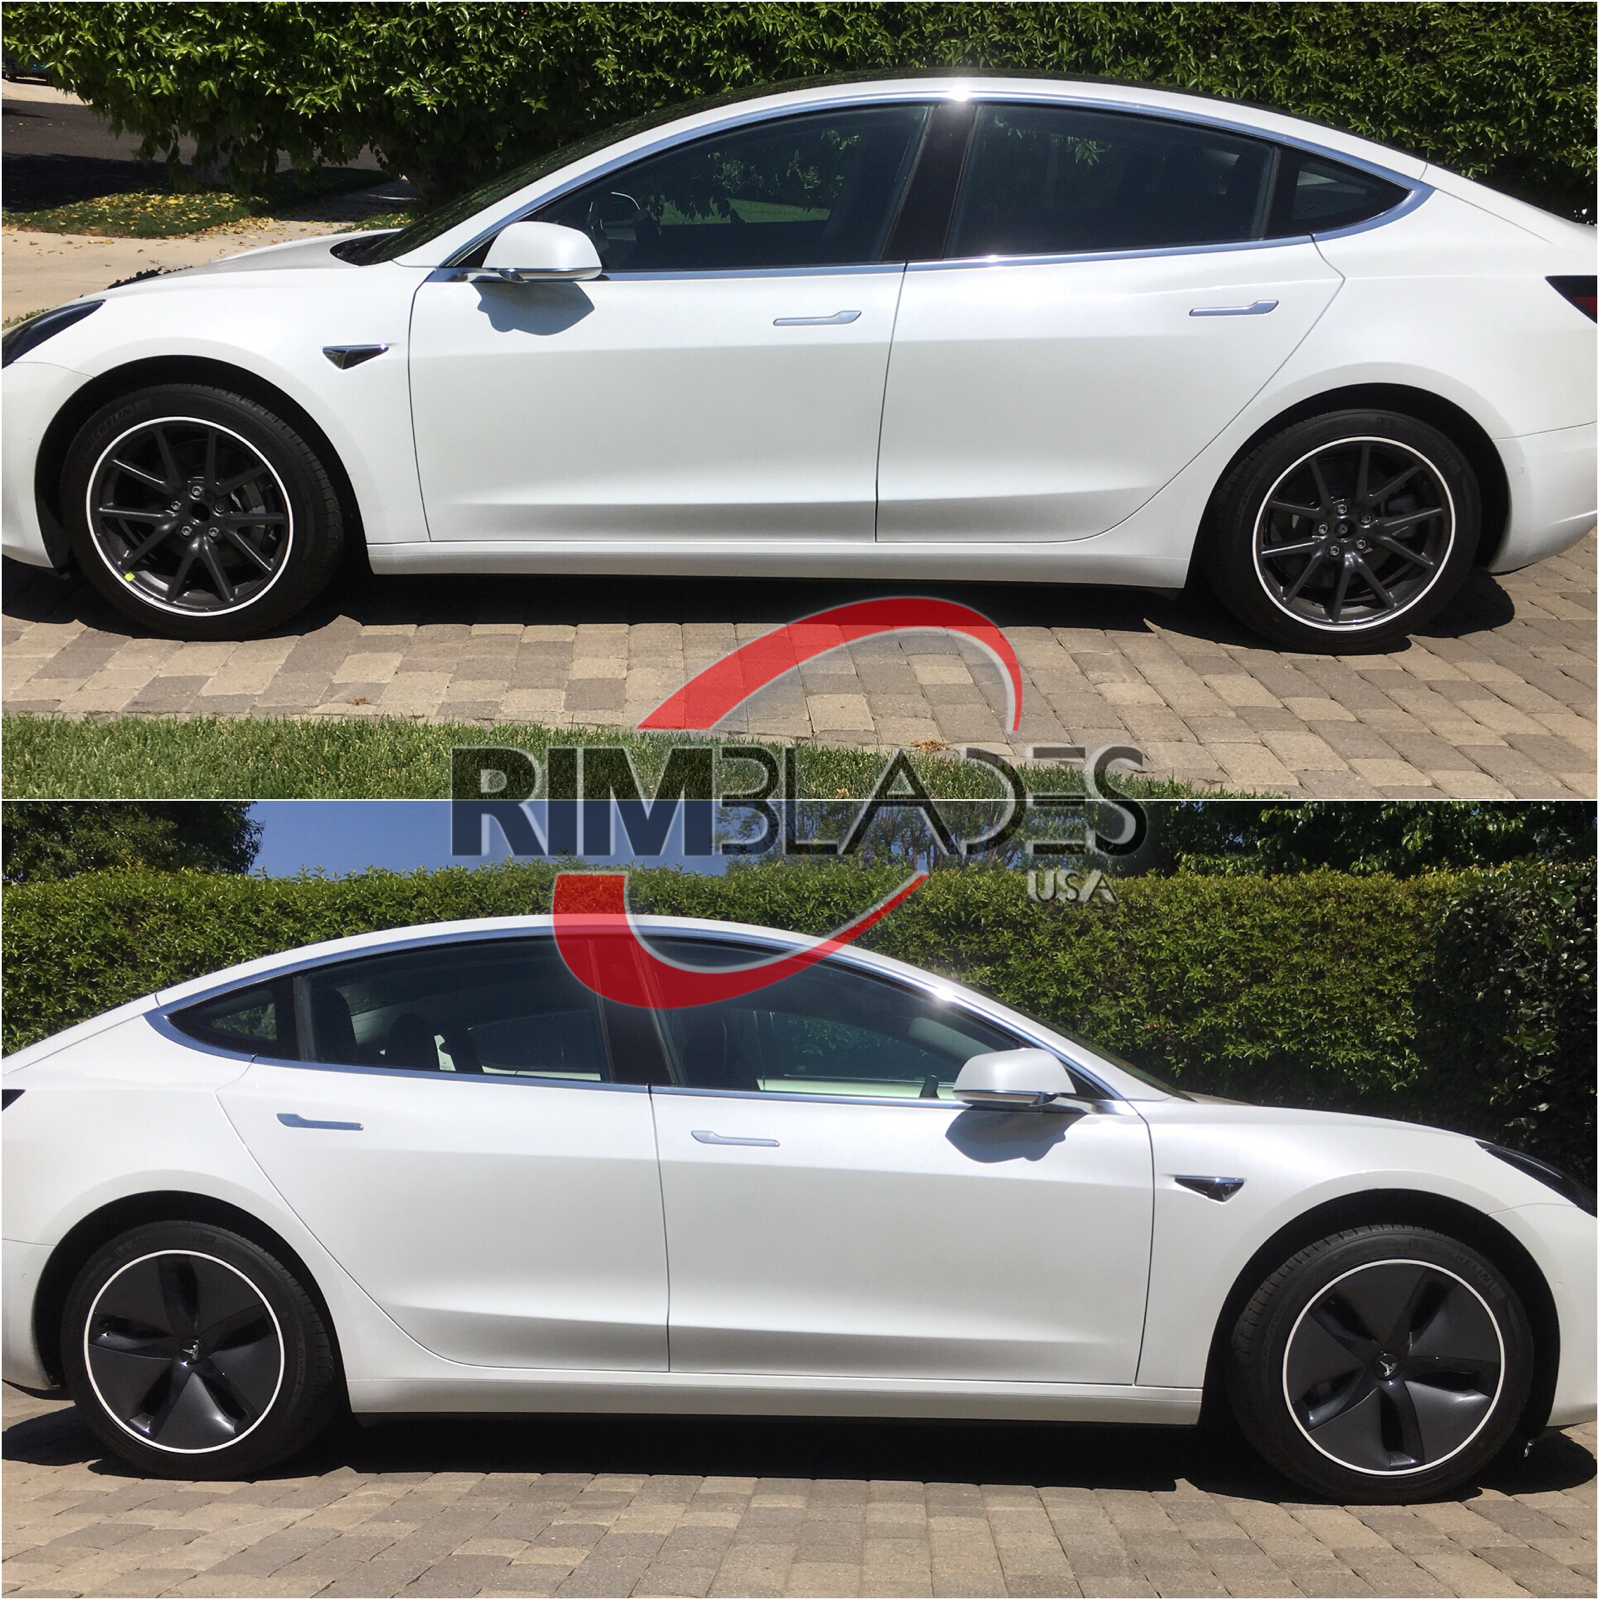 White Rimsavers on a Model 3 with 18: Aero wheels (covers removed)